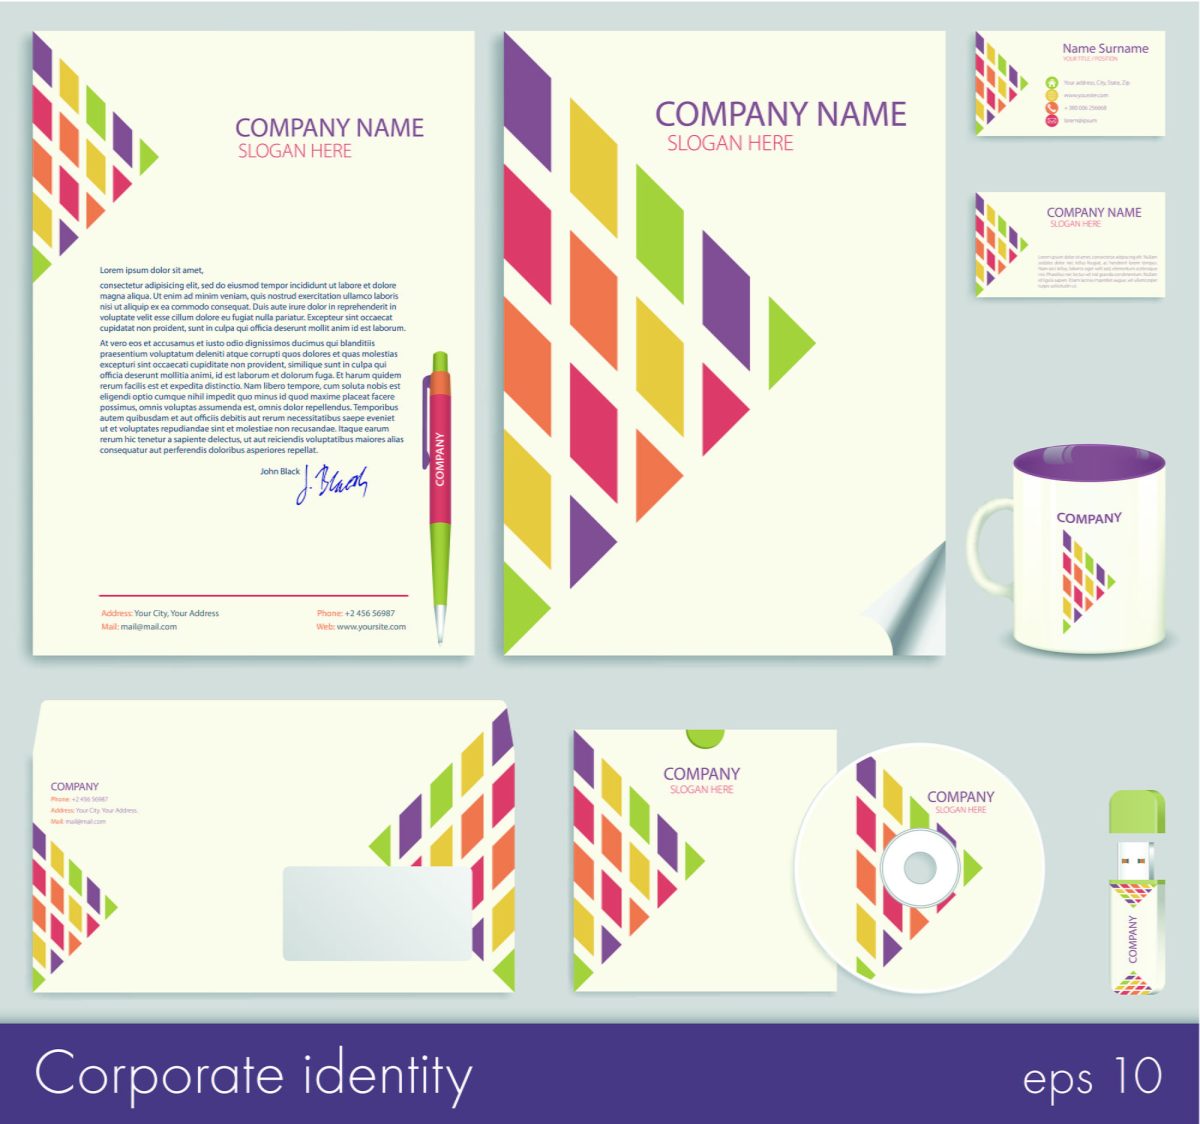 Beyond The Logo: The Heart and Soul of Corporate Identity